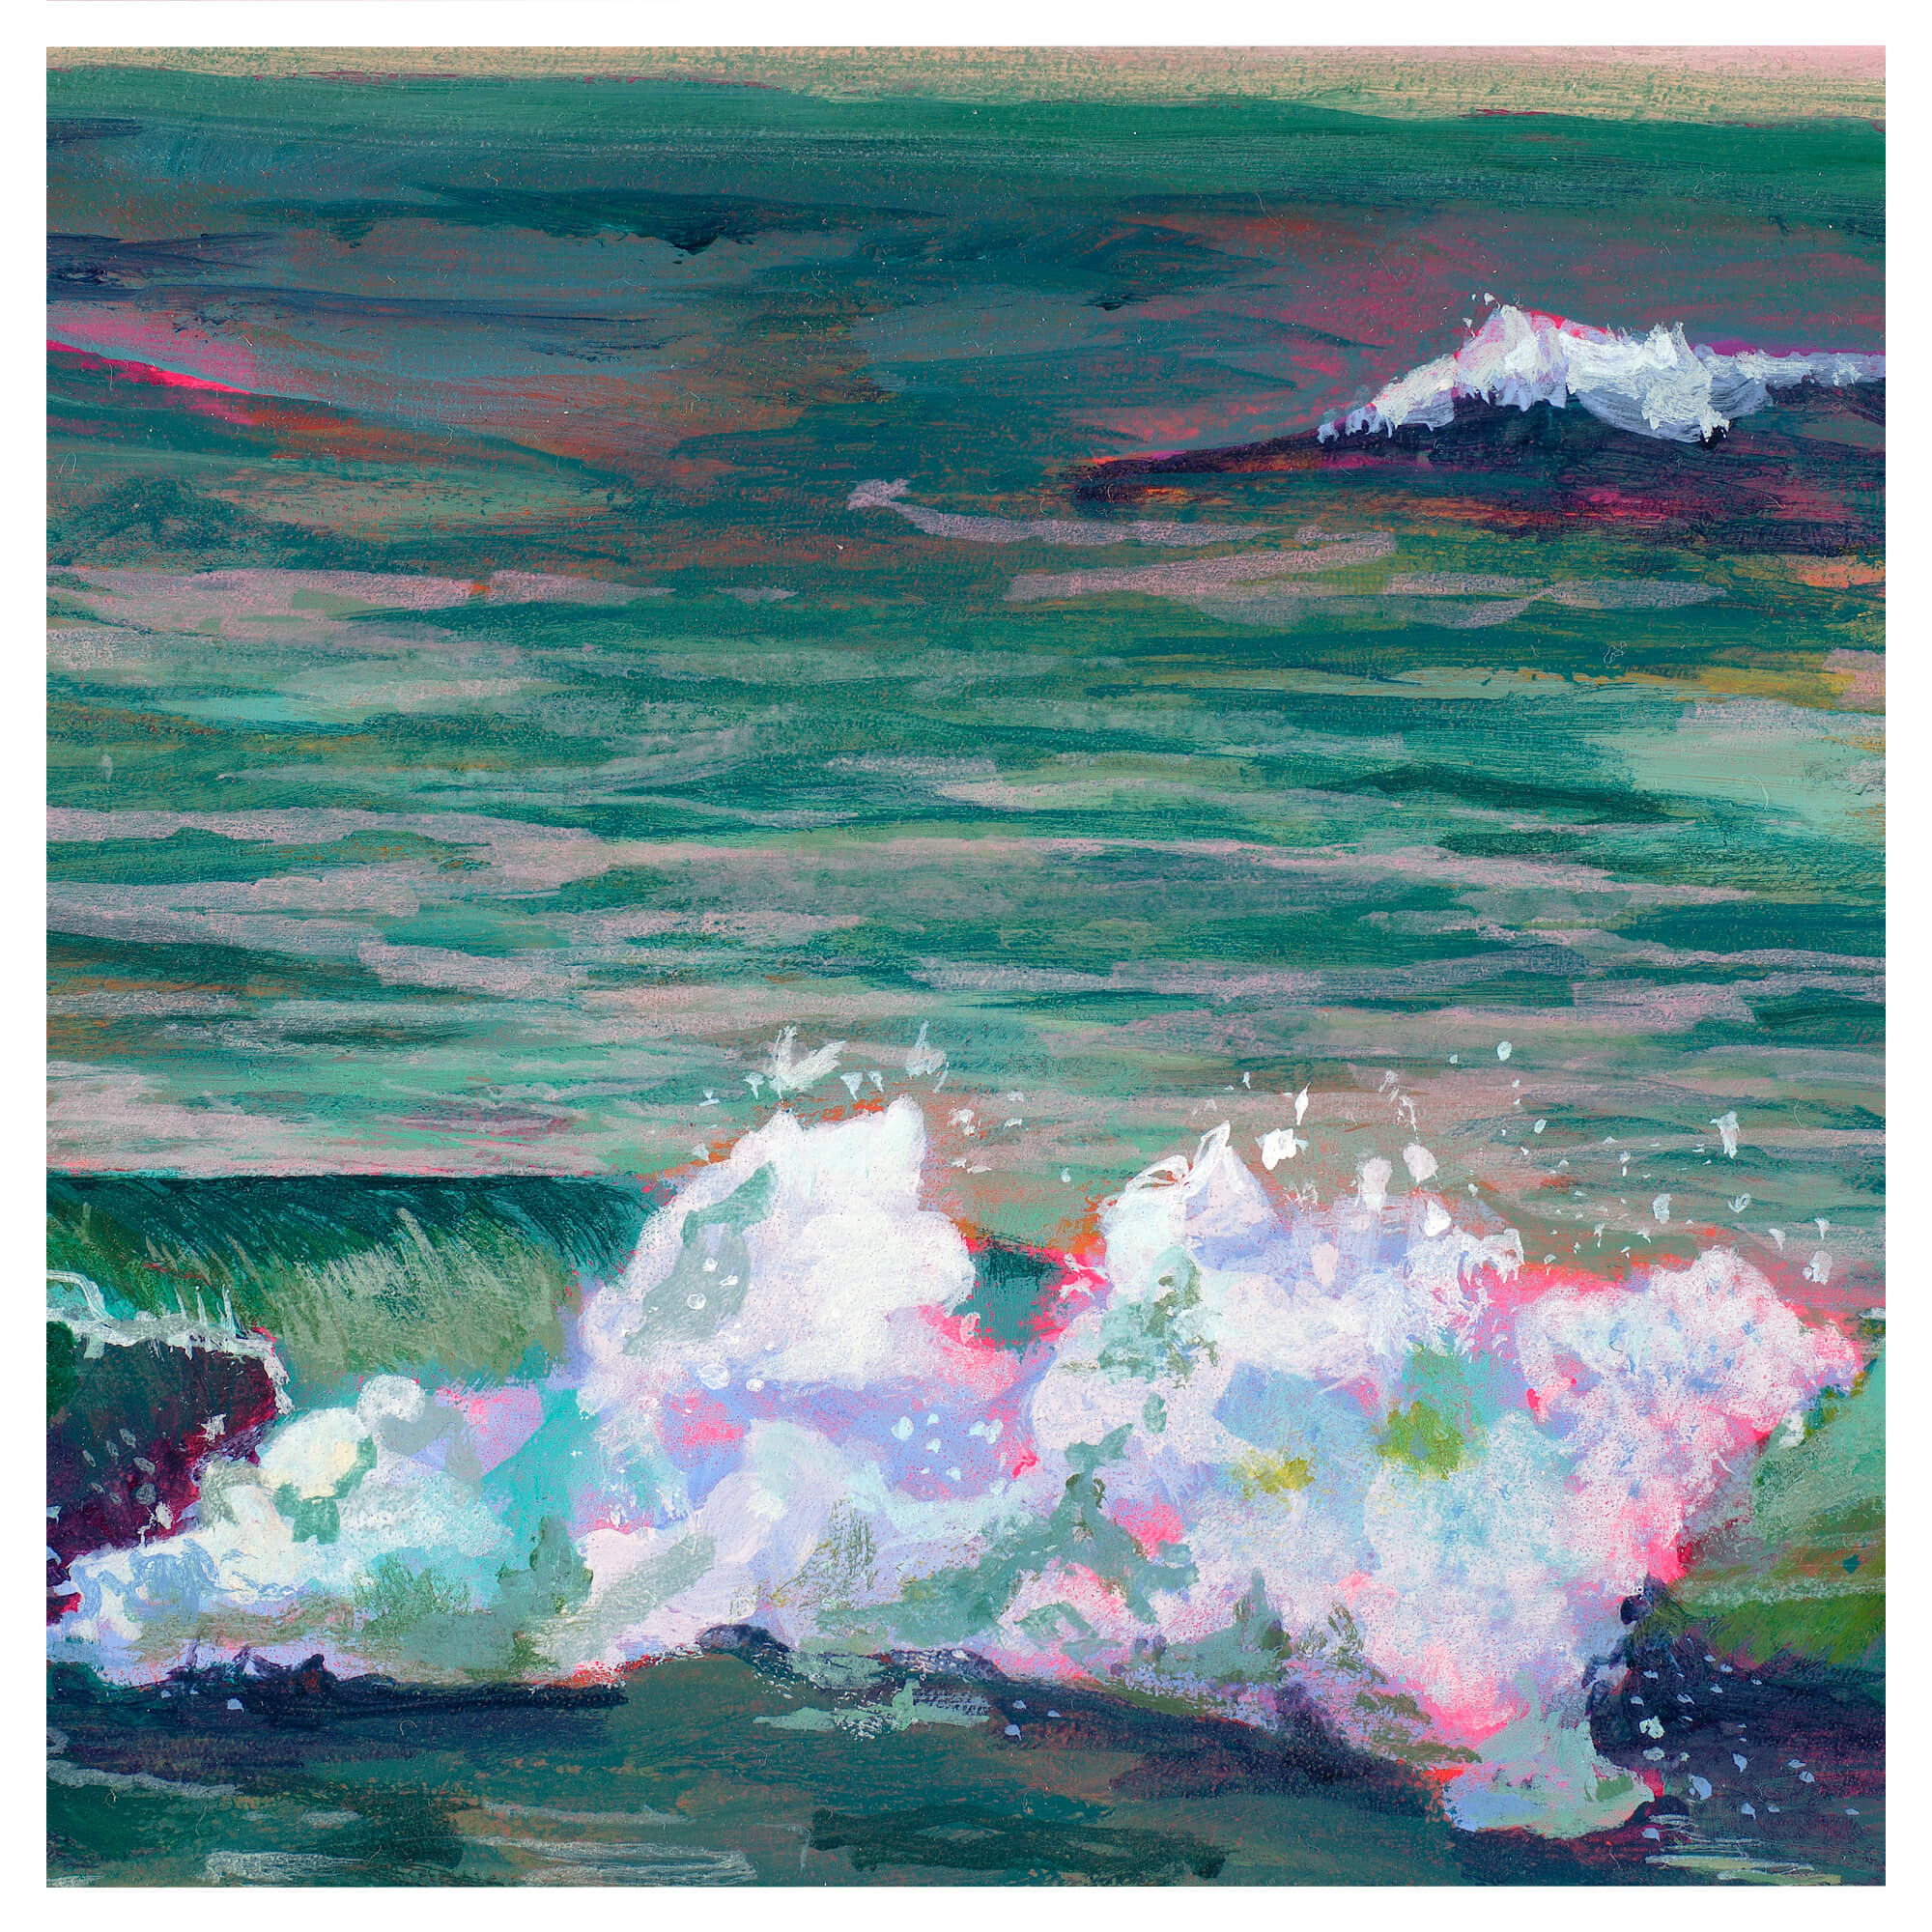 Green hued ocean waters with a touch of pink hues by Hawaii artist Lindsay Wilkins